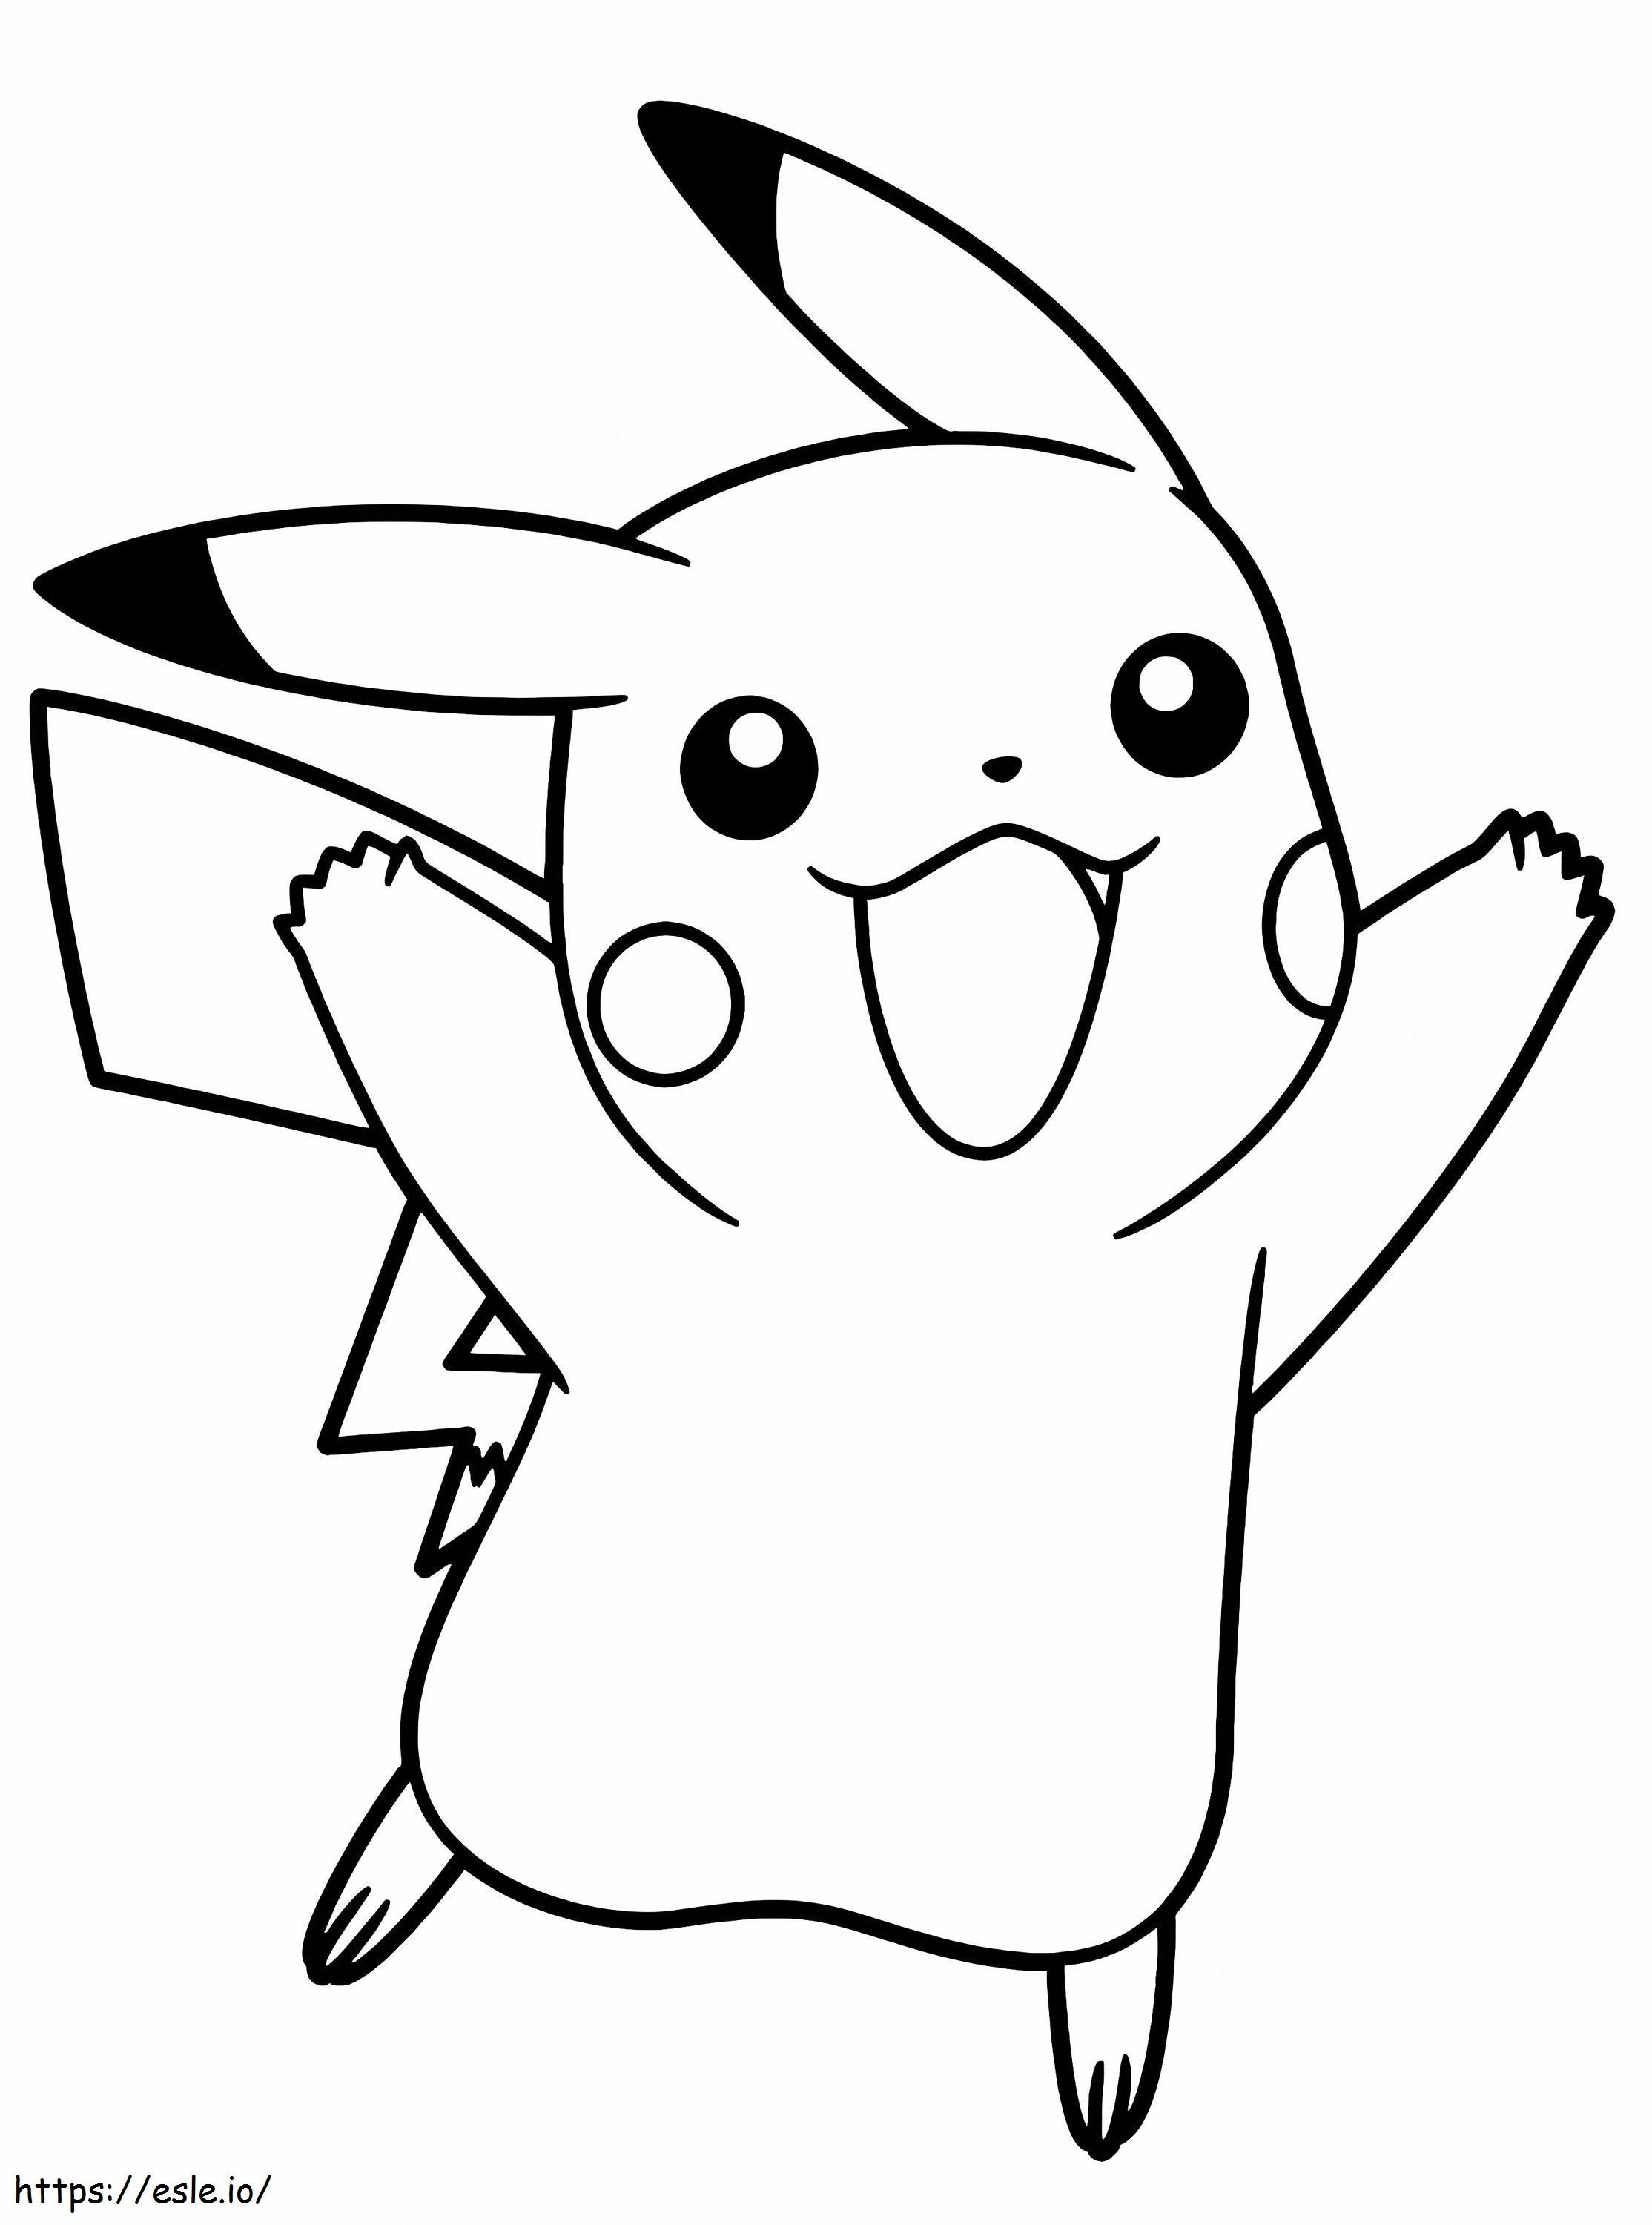 Happy Pikachu coloring page